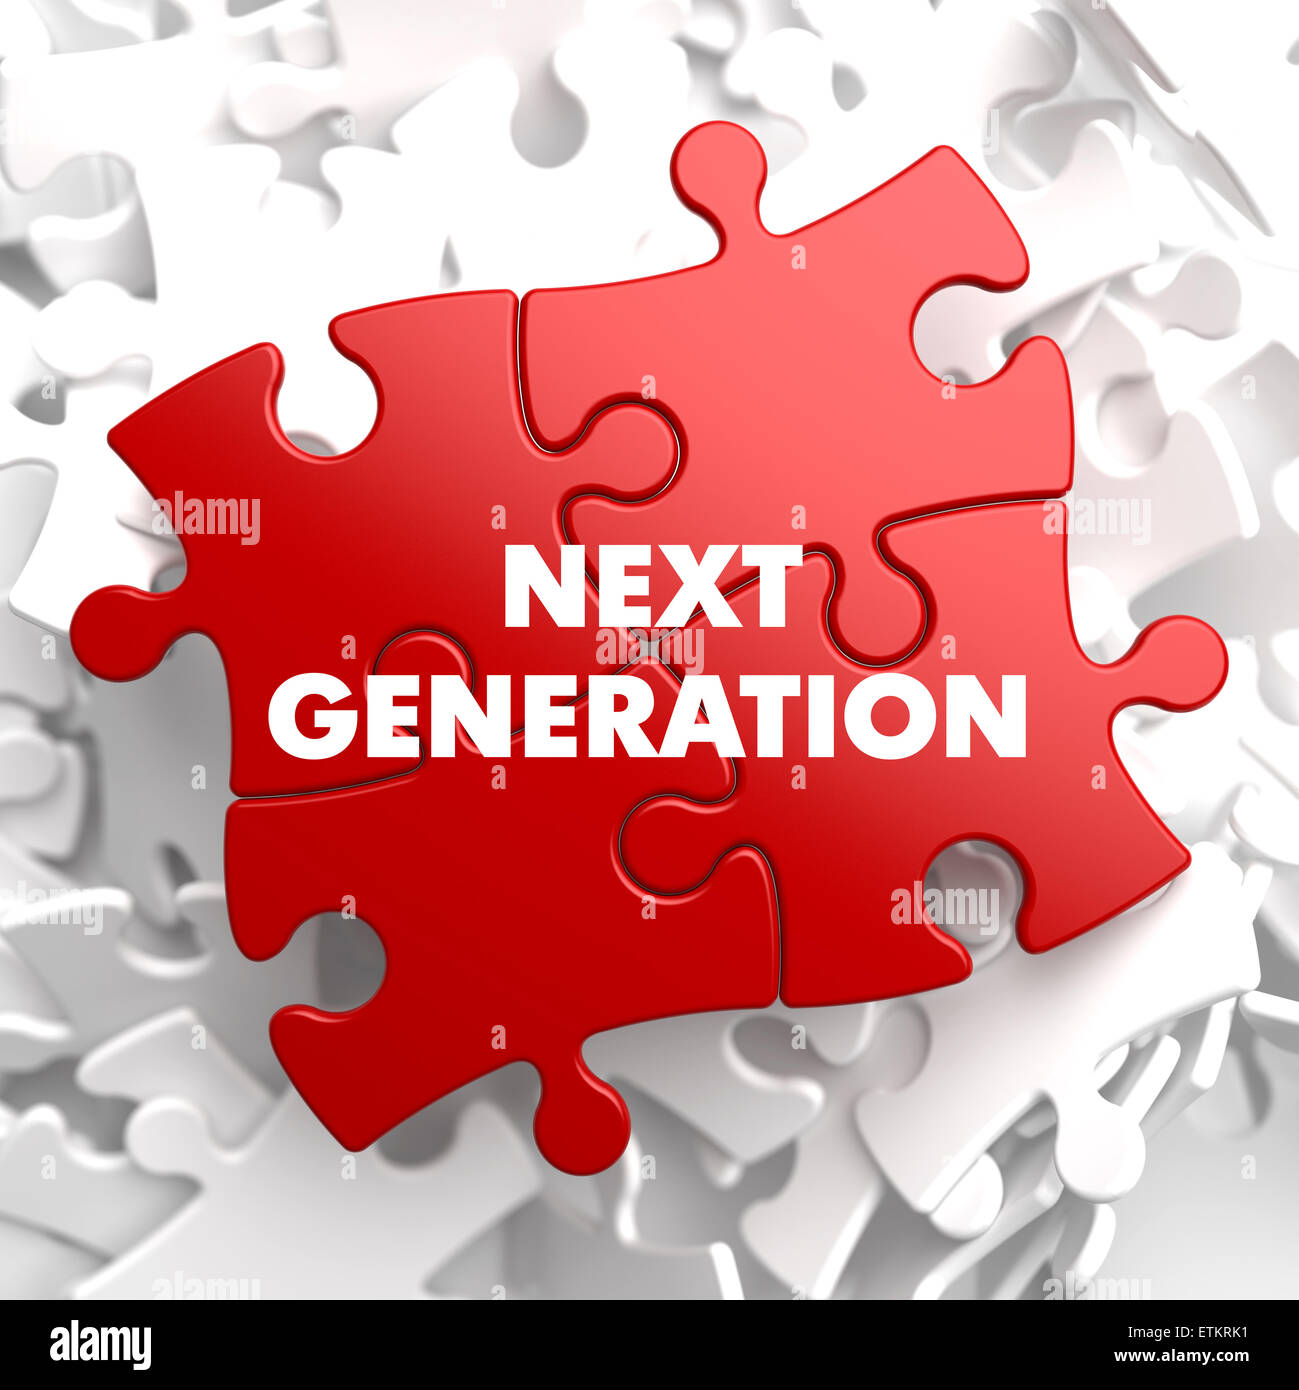 Next Generation on Red Puzzle. Stock Photo